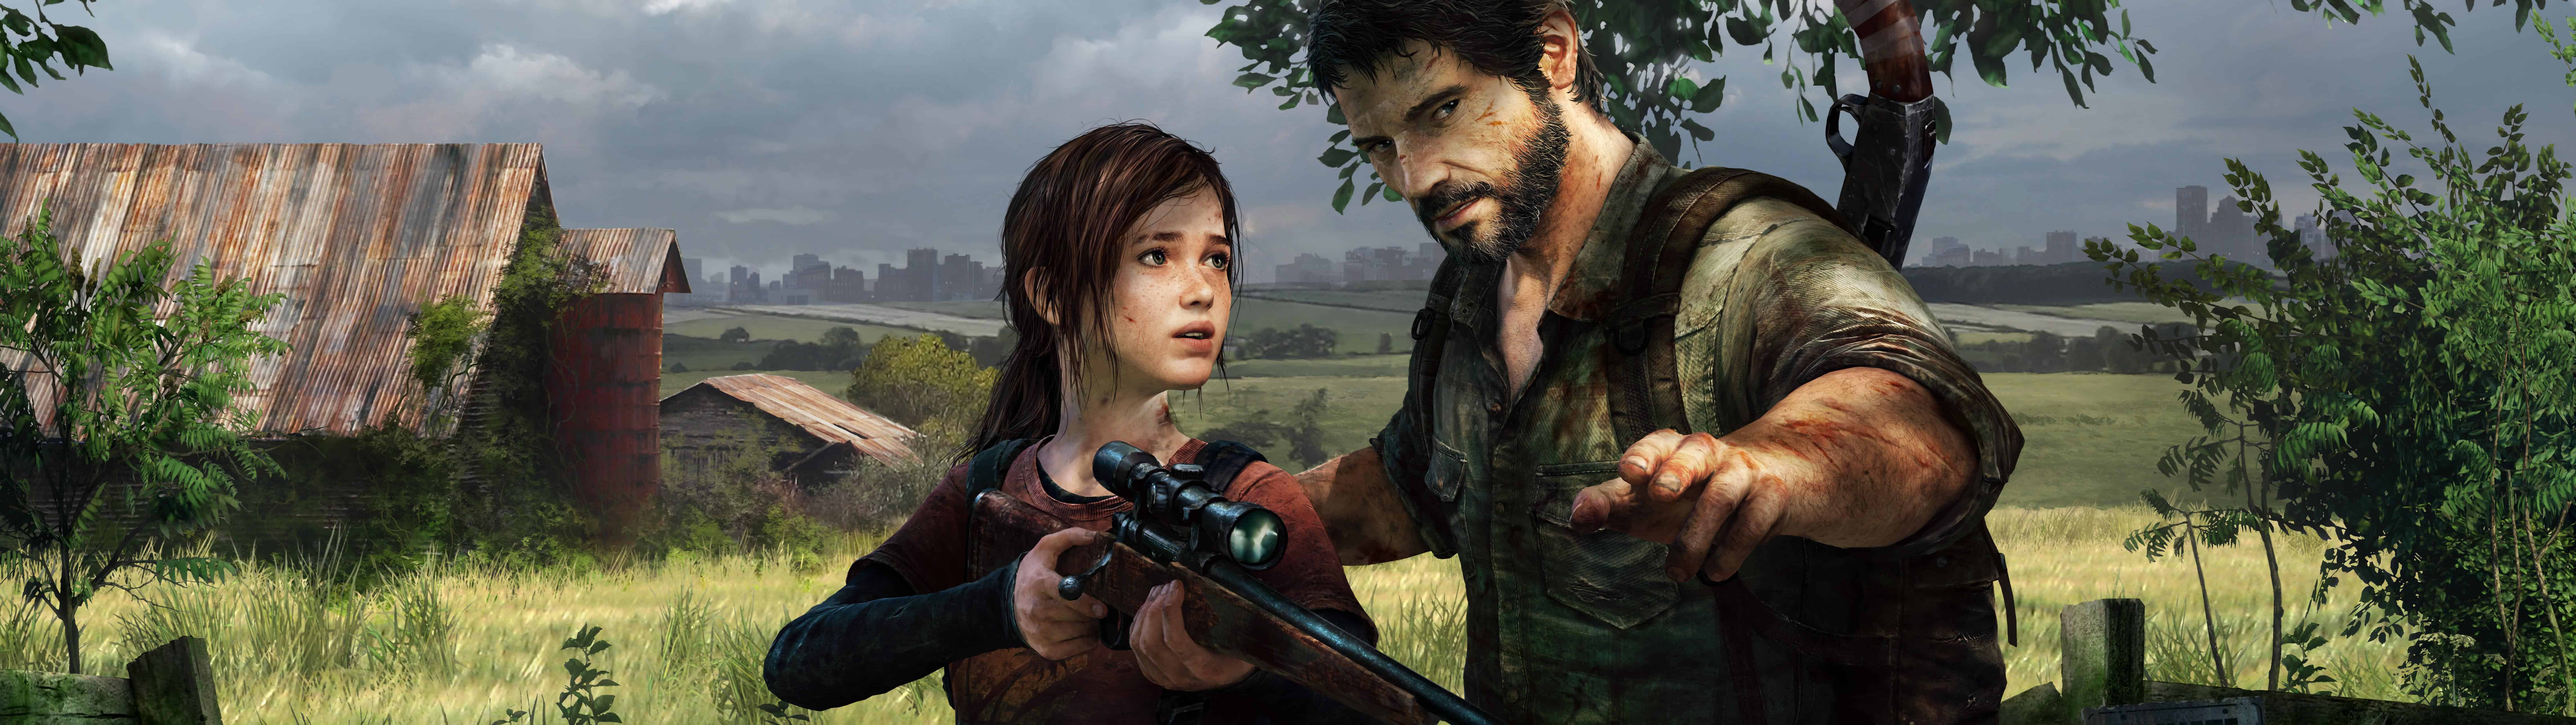 the last of us remastered dual monitor wallpaper